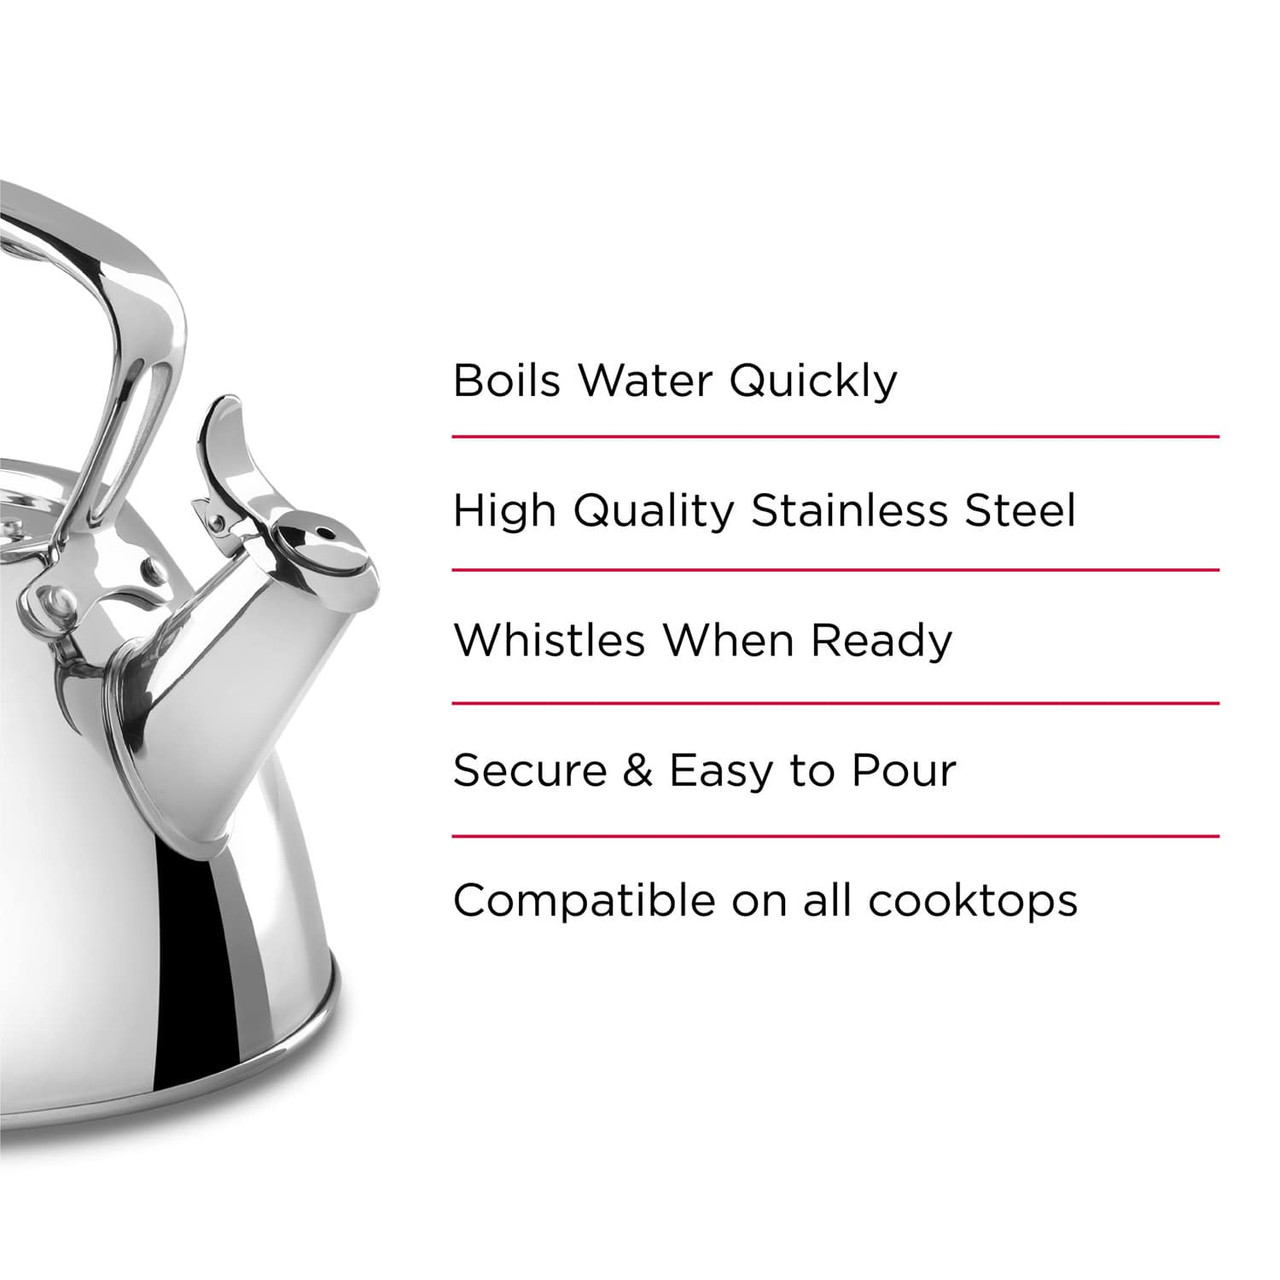 https://cdn11.bigcommerce.com/s-hccytny0od/images/stencil/1280x1280/products/4021/14809/all-clad-stainless-steel-tea-kettle-2__24939.1620122807.jpg?c=2?imbypass=on